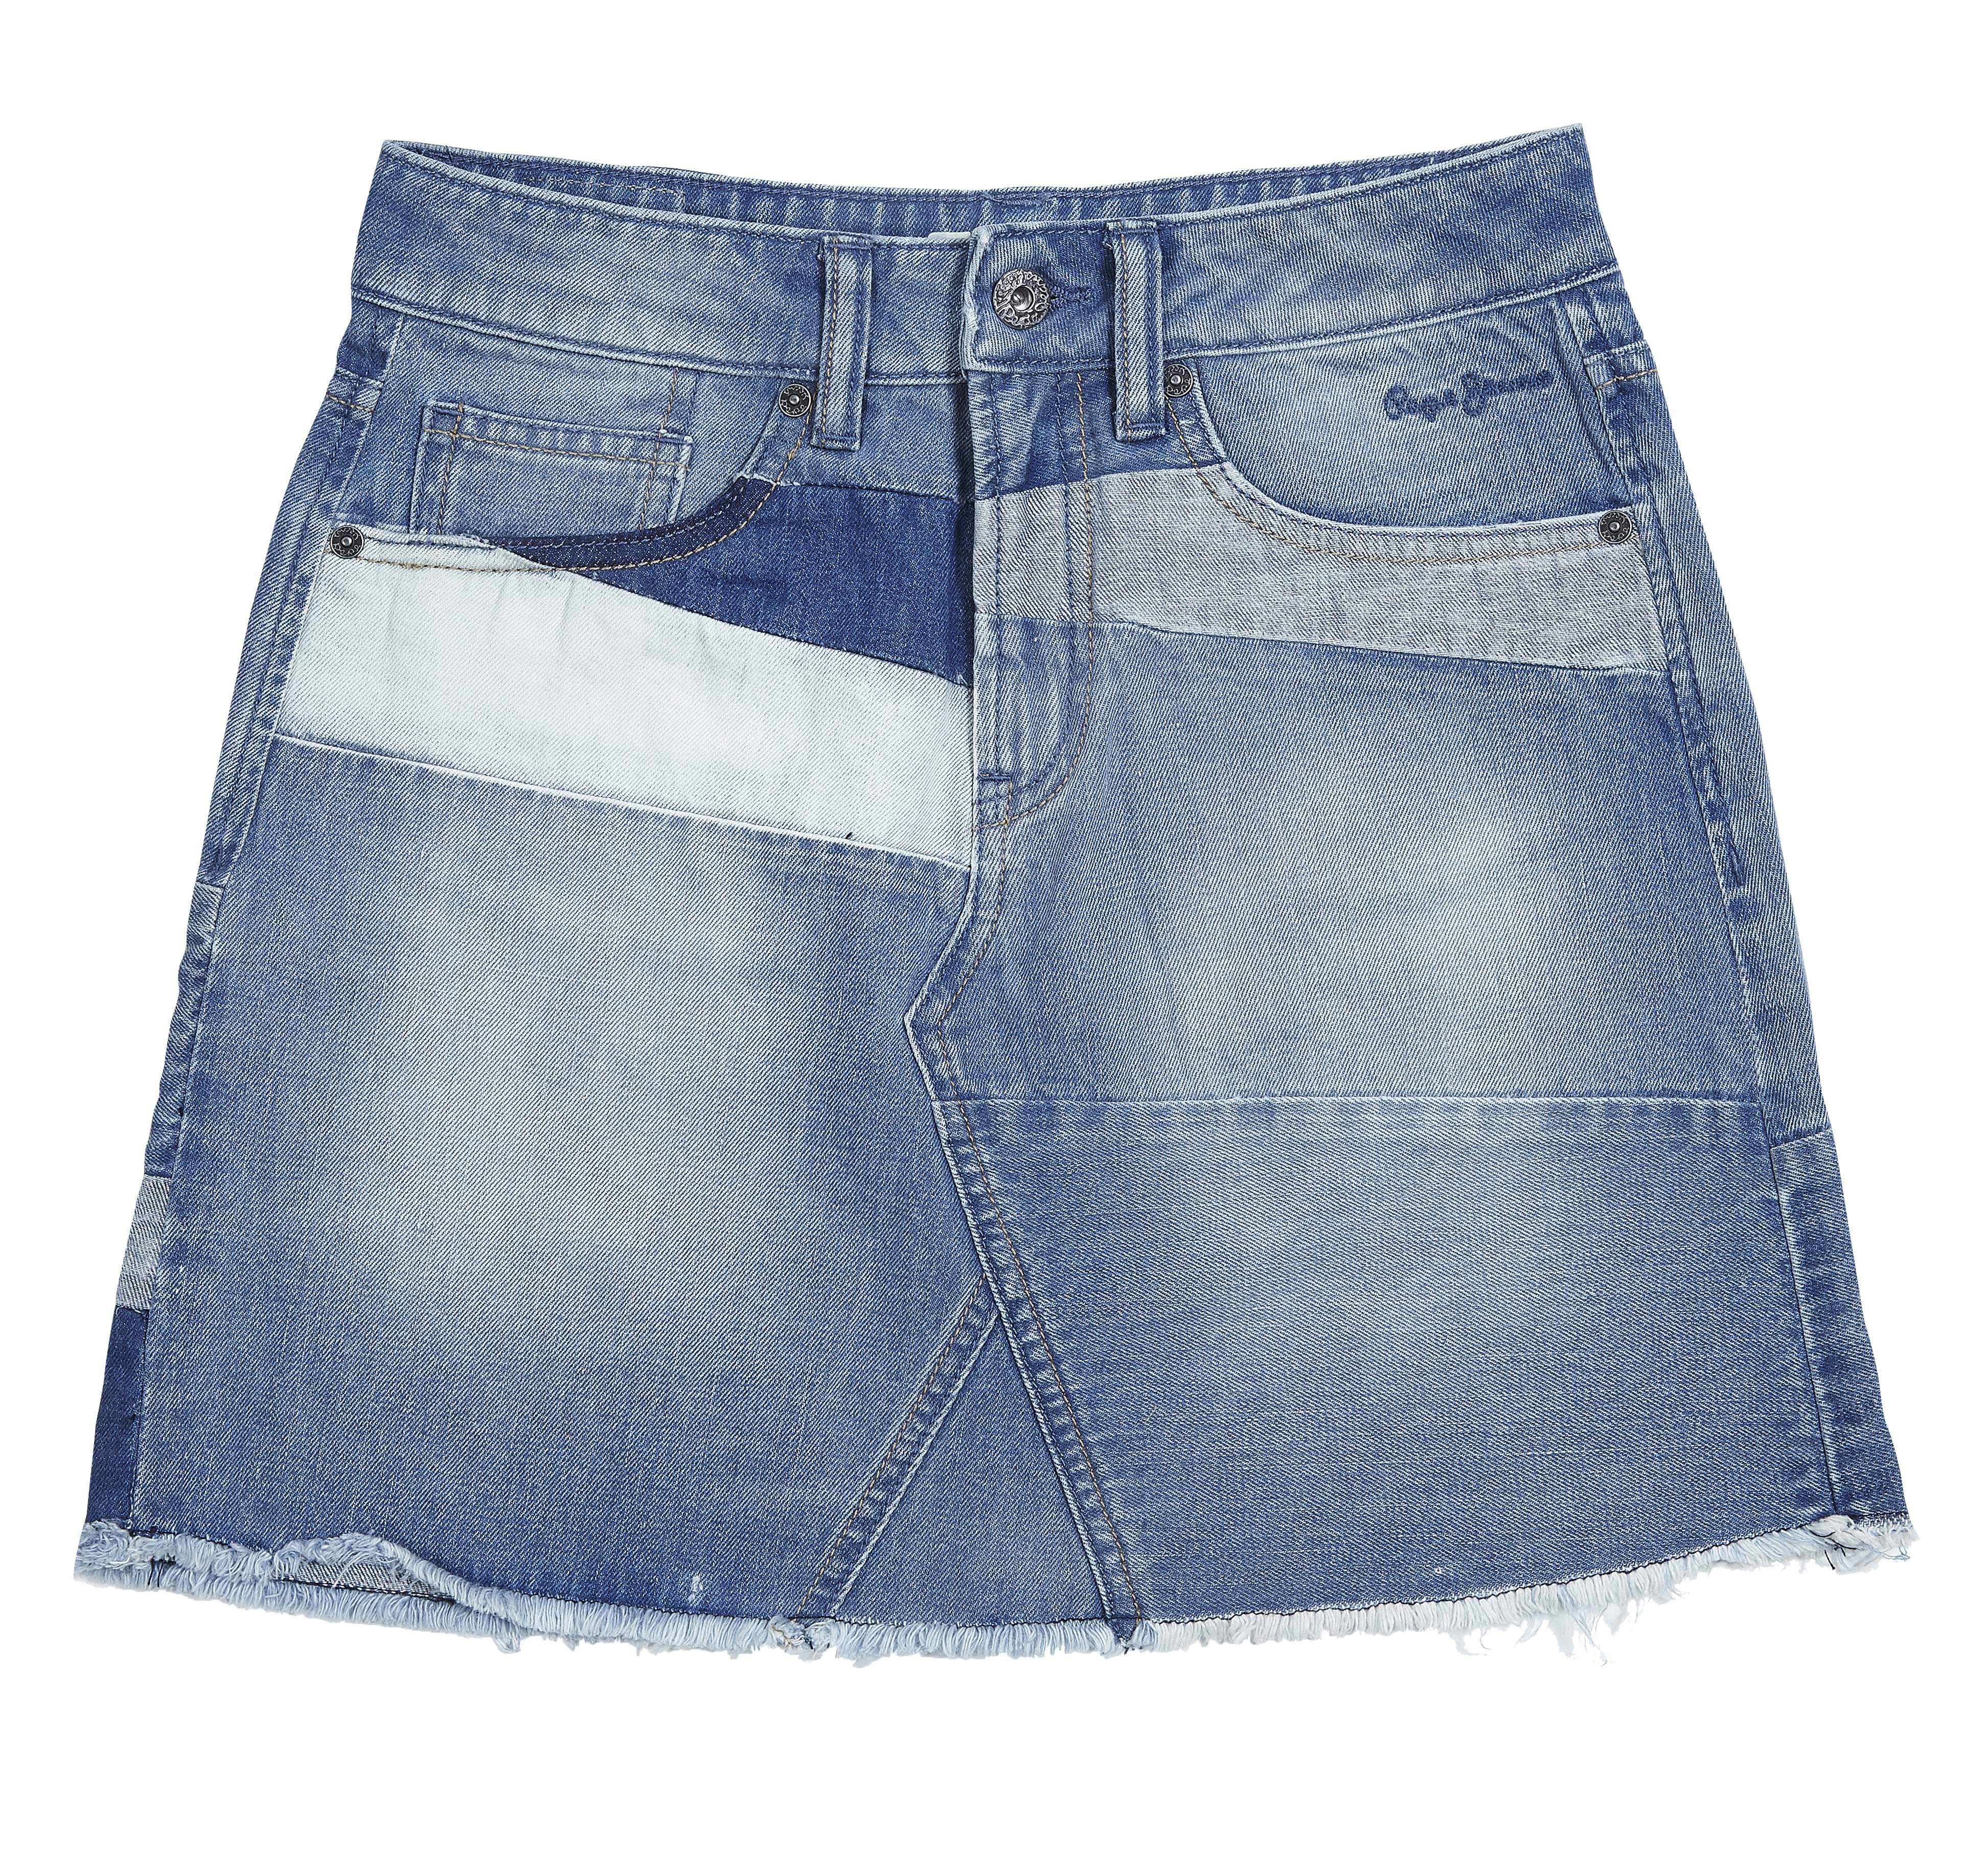 Skirt, Pepe Jeans, INR 2099